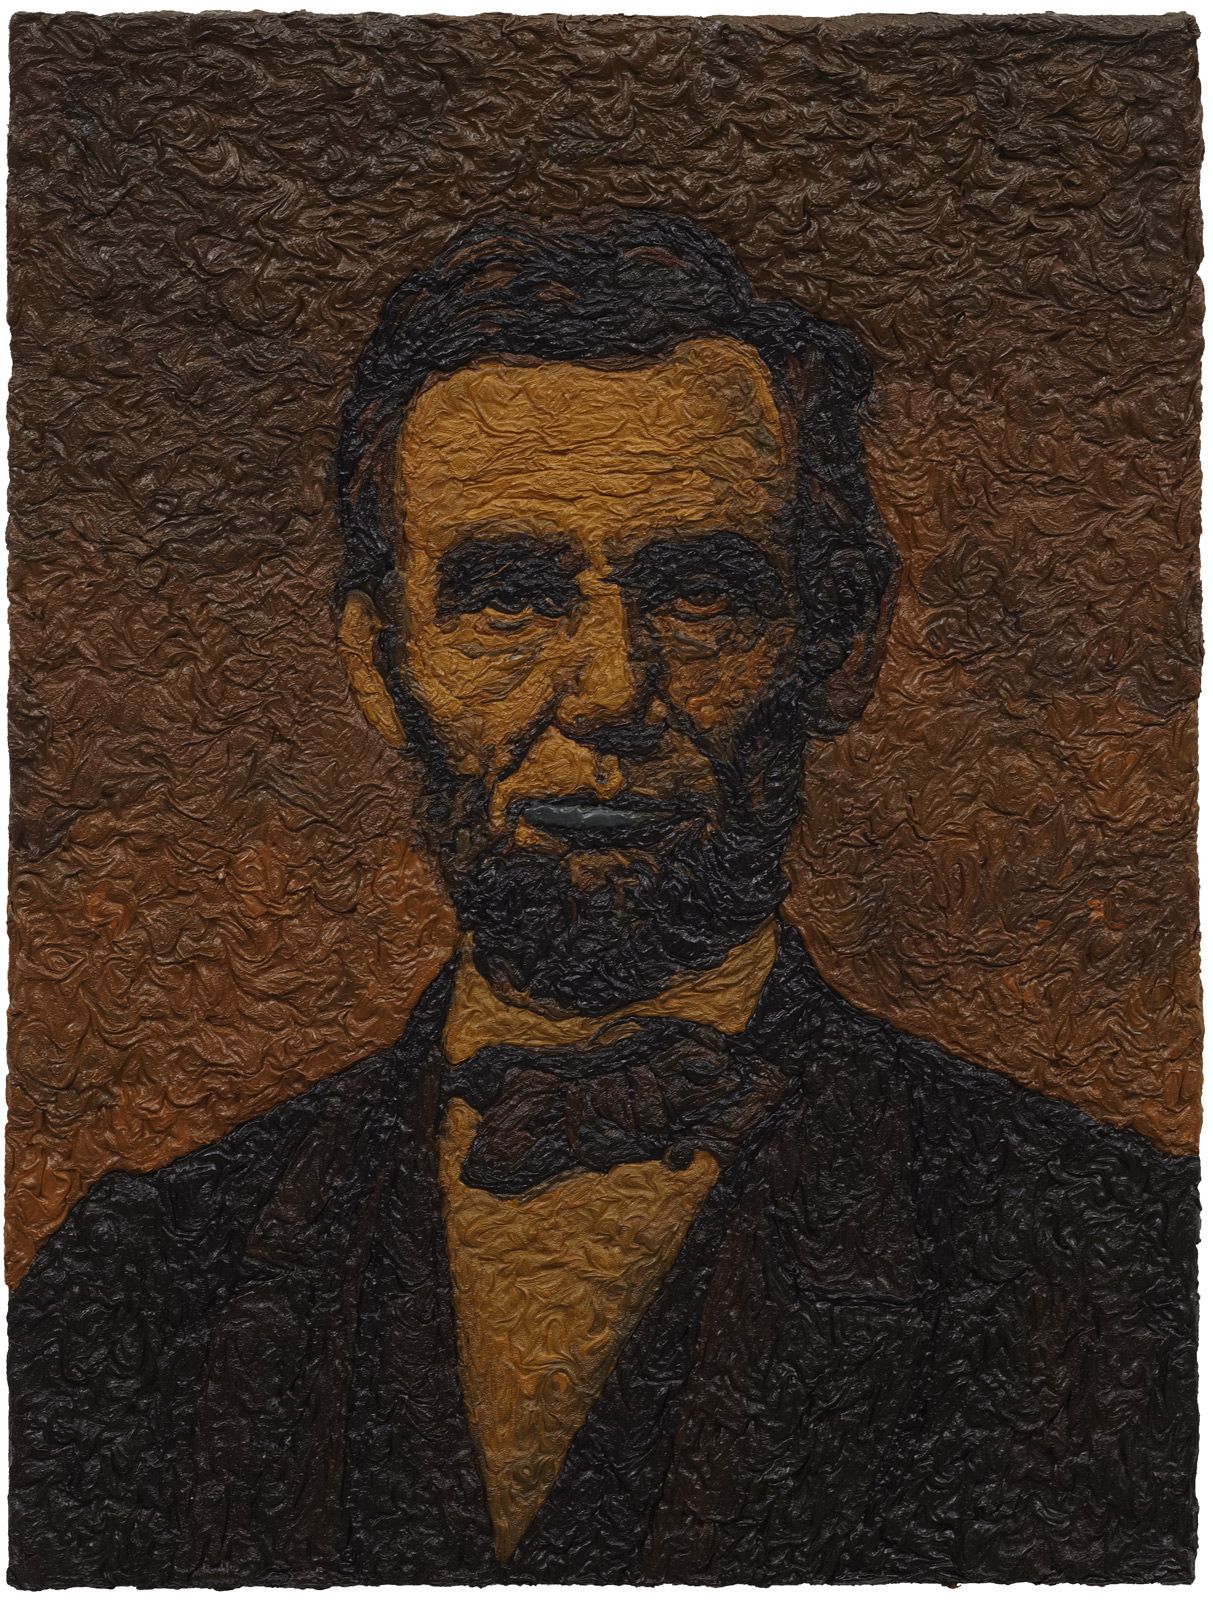 Dark reinvention of classsic image of Abraham Lincoln by Mark Alexander.